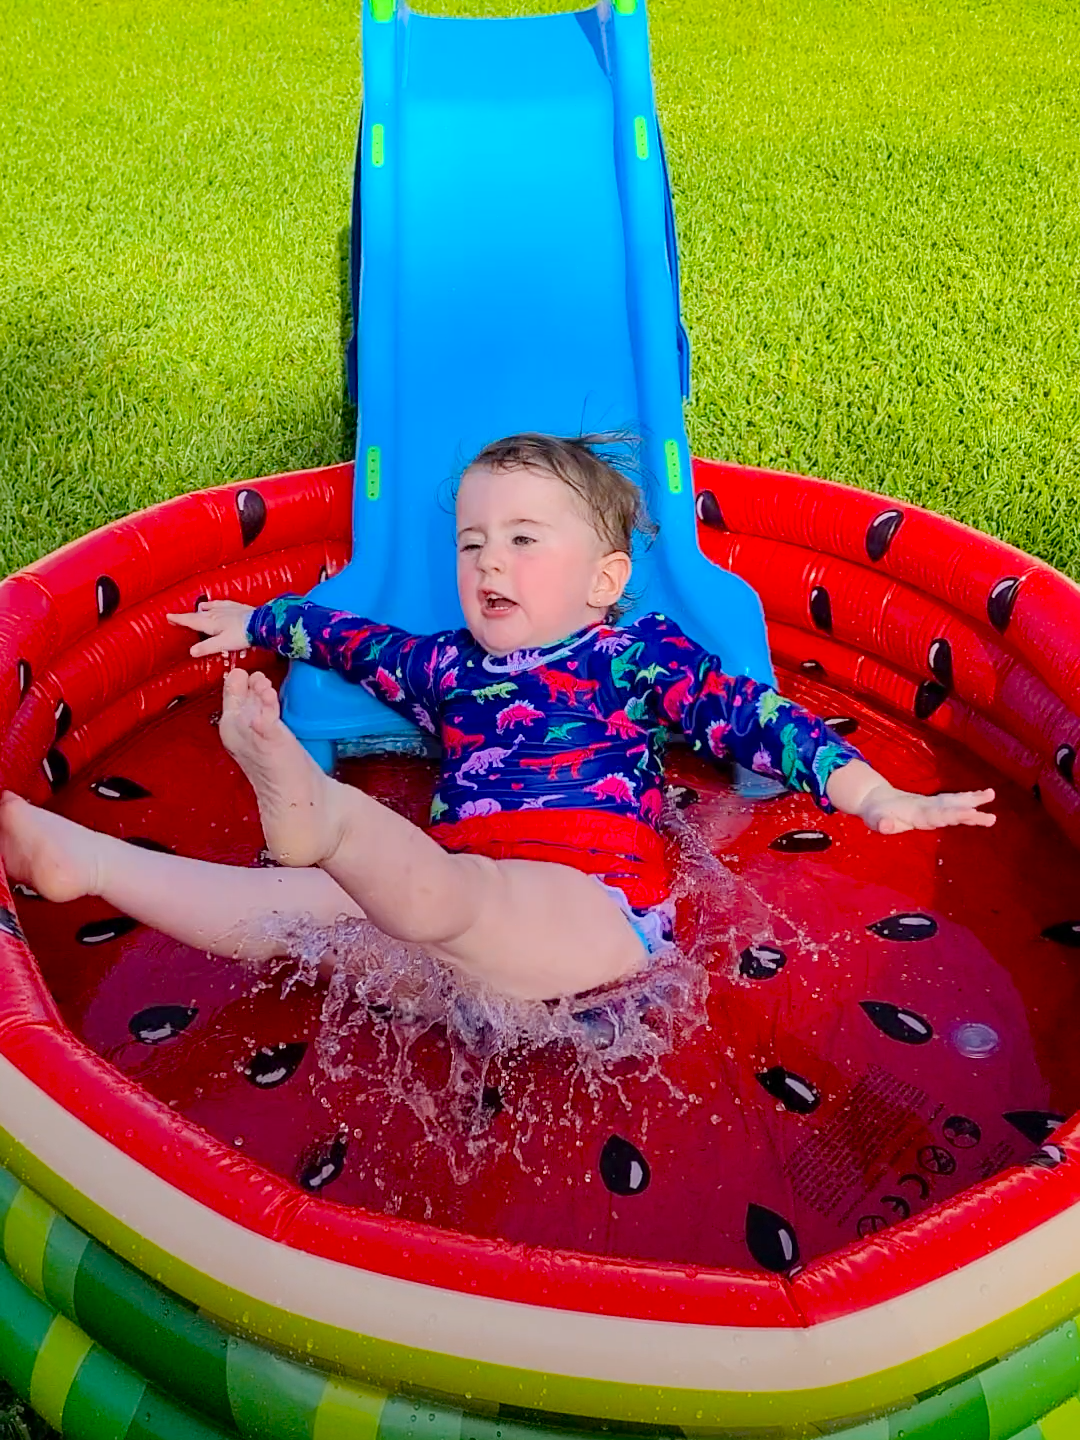 Oops, shame 🤣🤣 #baby #Outdoors #fail #adorablebabies #funnyvideos #kids #newborn #longervideo #toddler #funny #funnybaby #babyplaying #water #trending #cutebaby #naughtybaby #viral